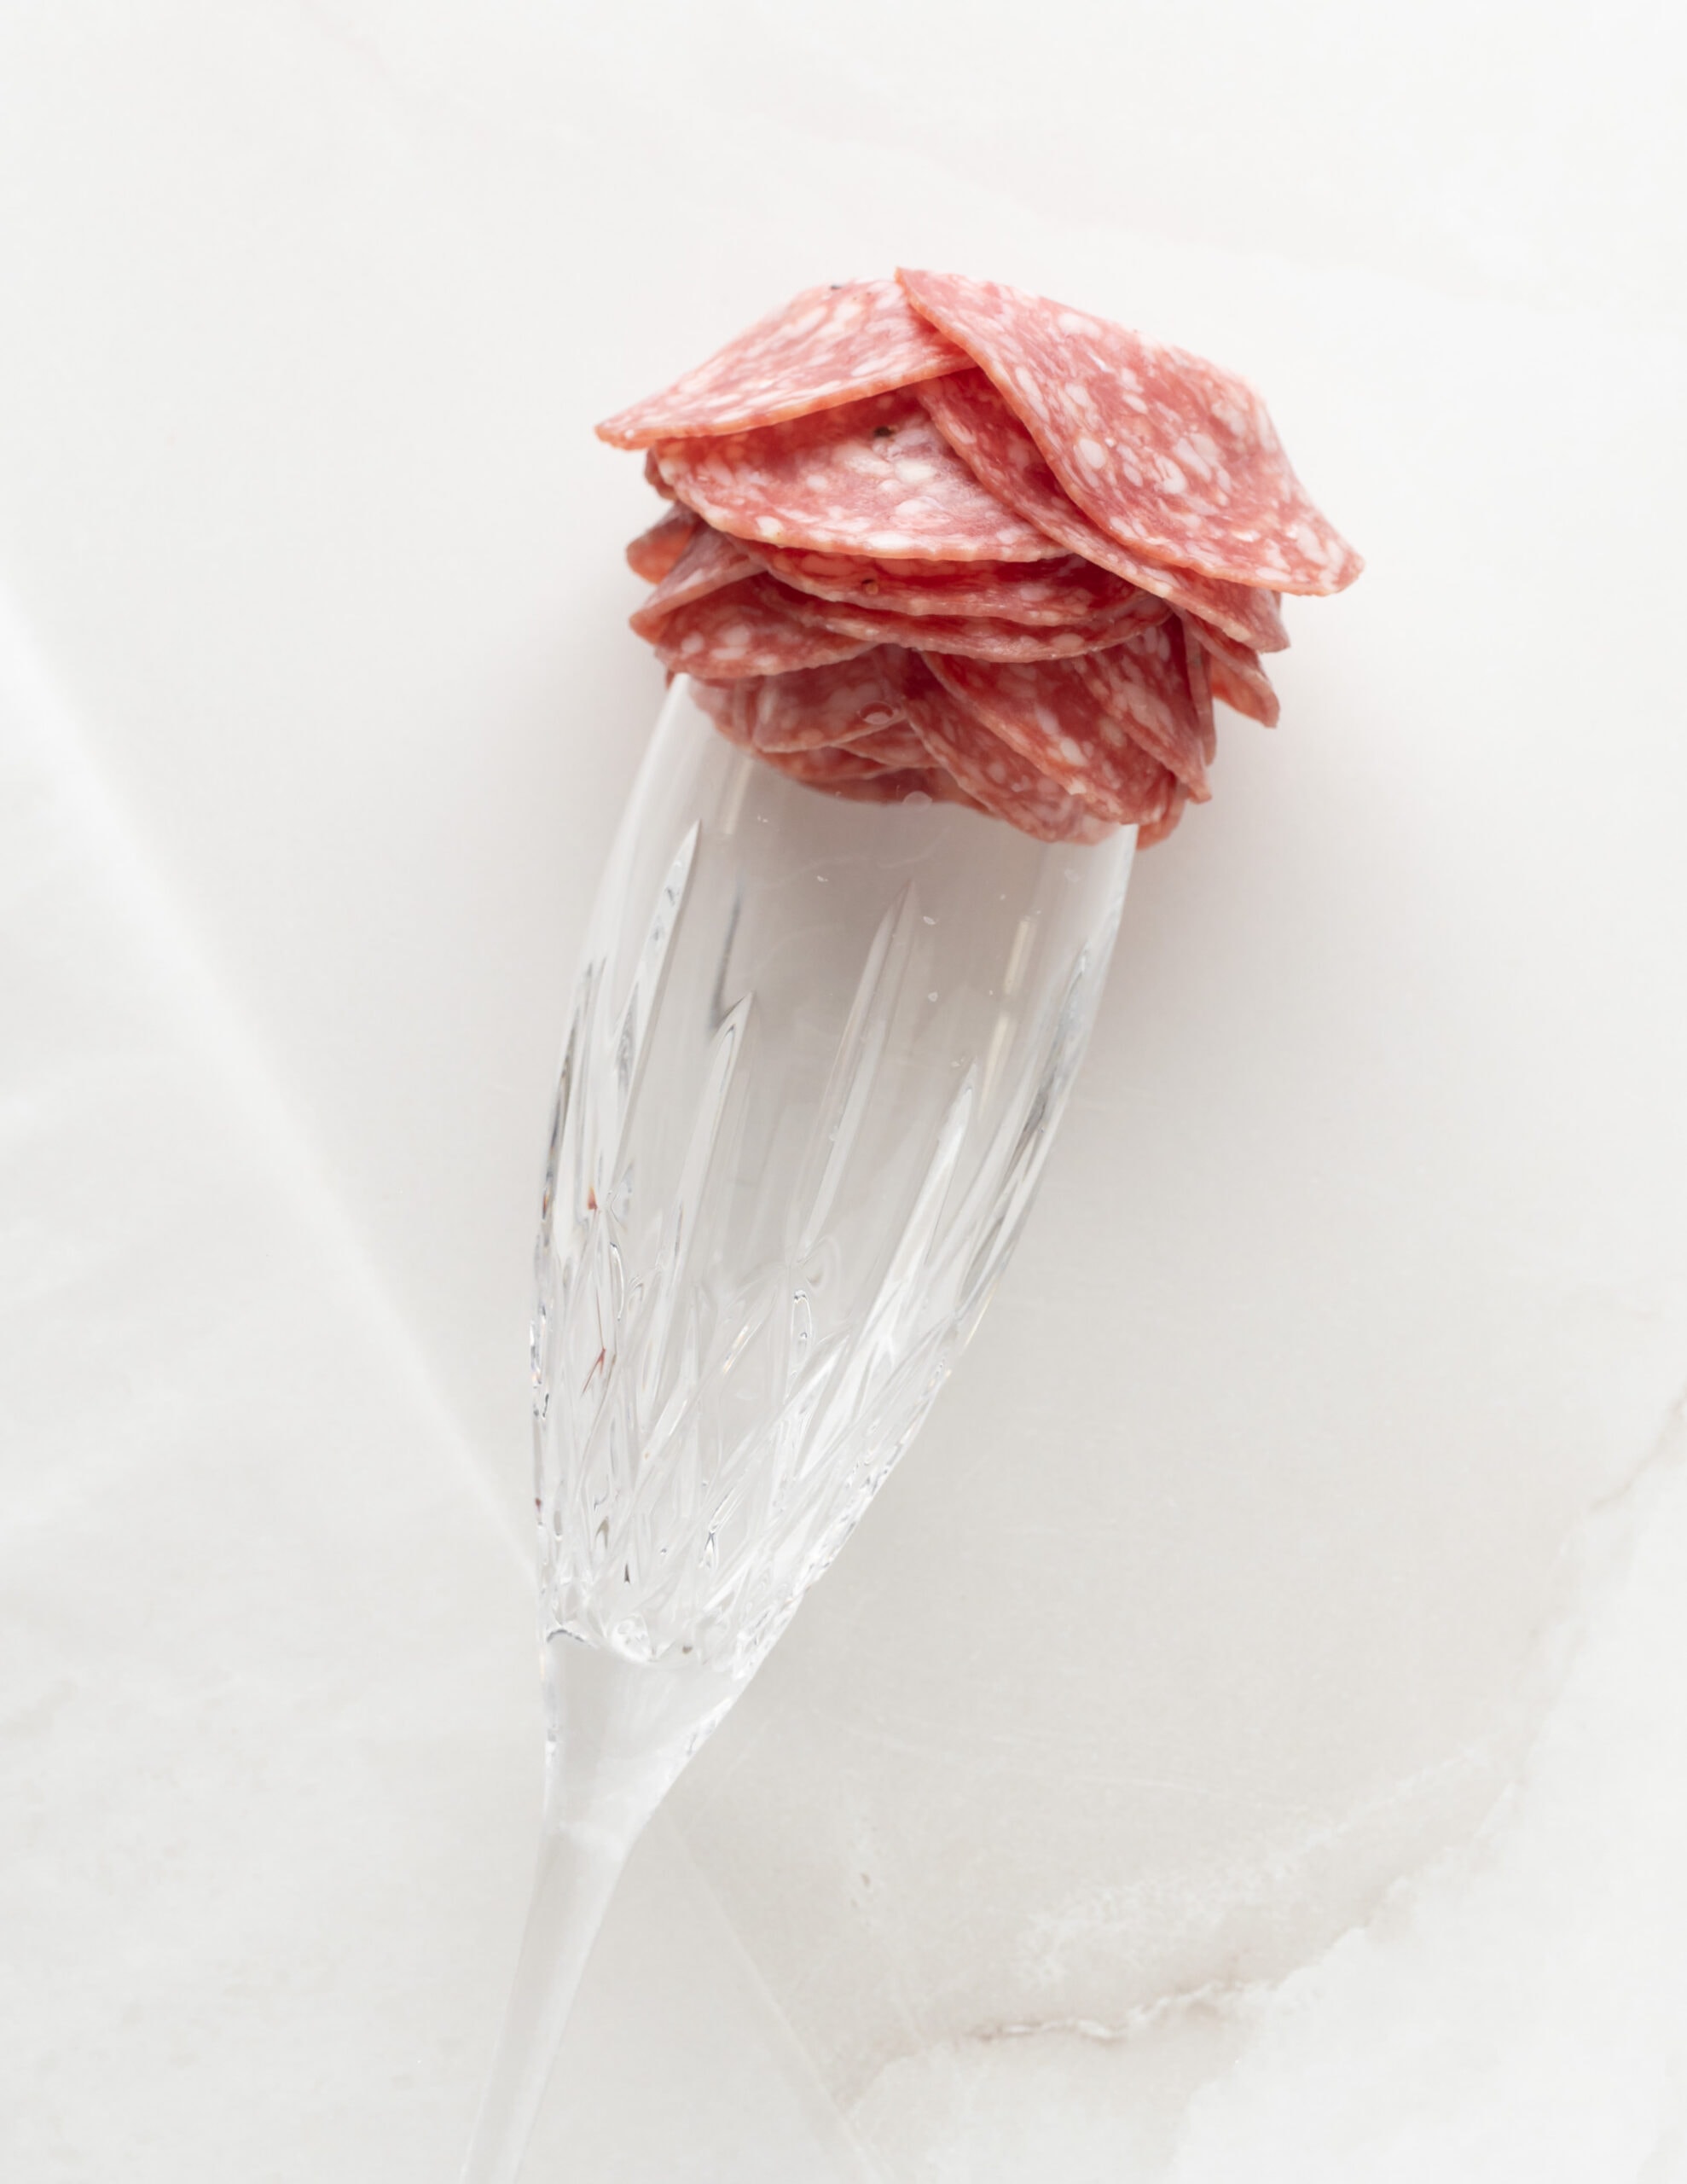 A champagne glass with 5 layers of salami, forming a salami rose. 